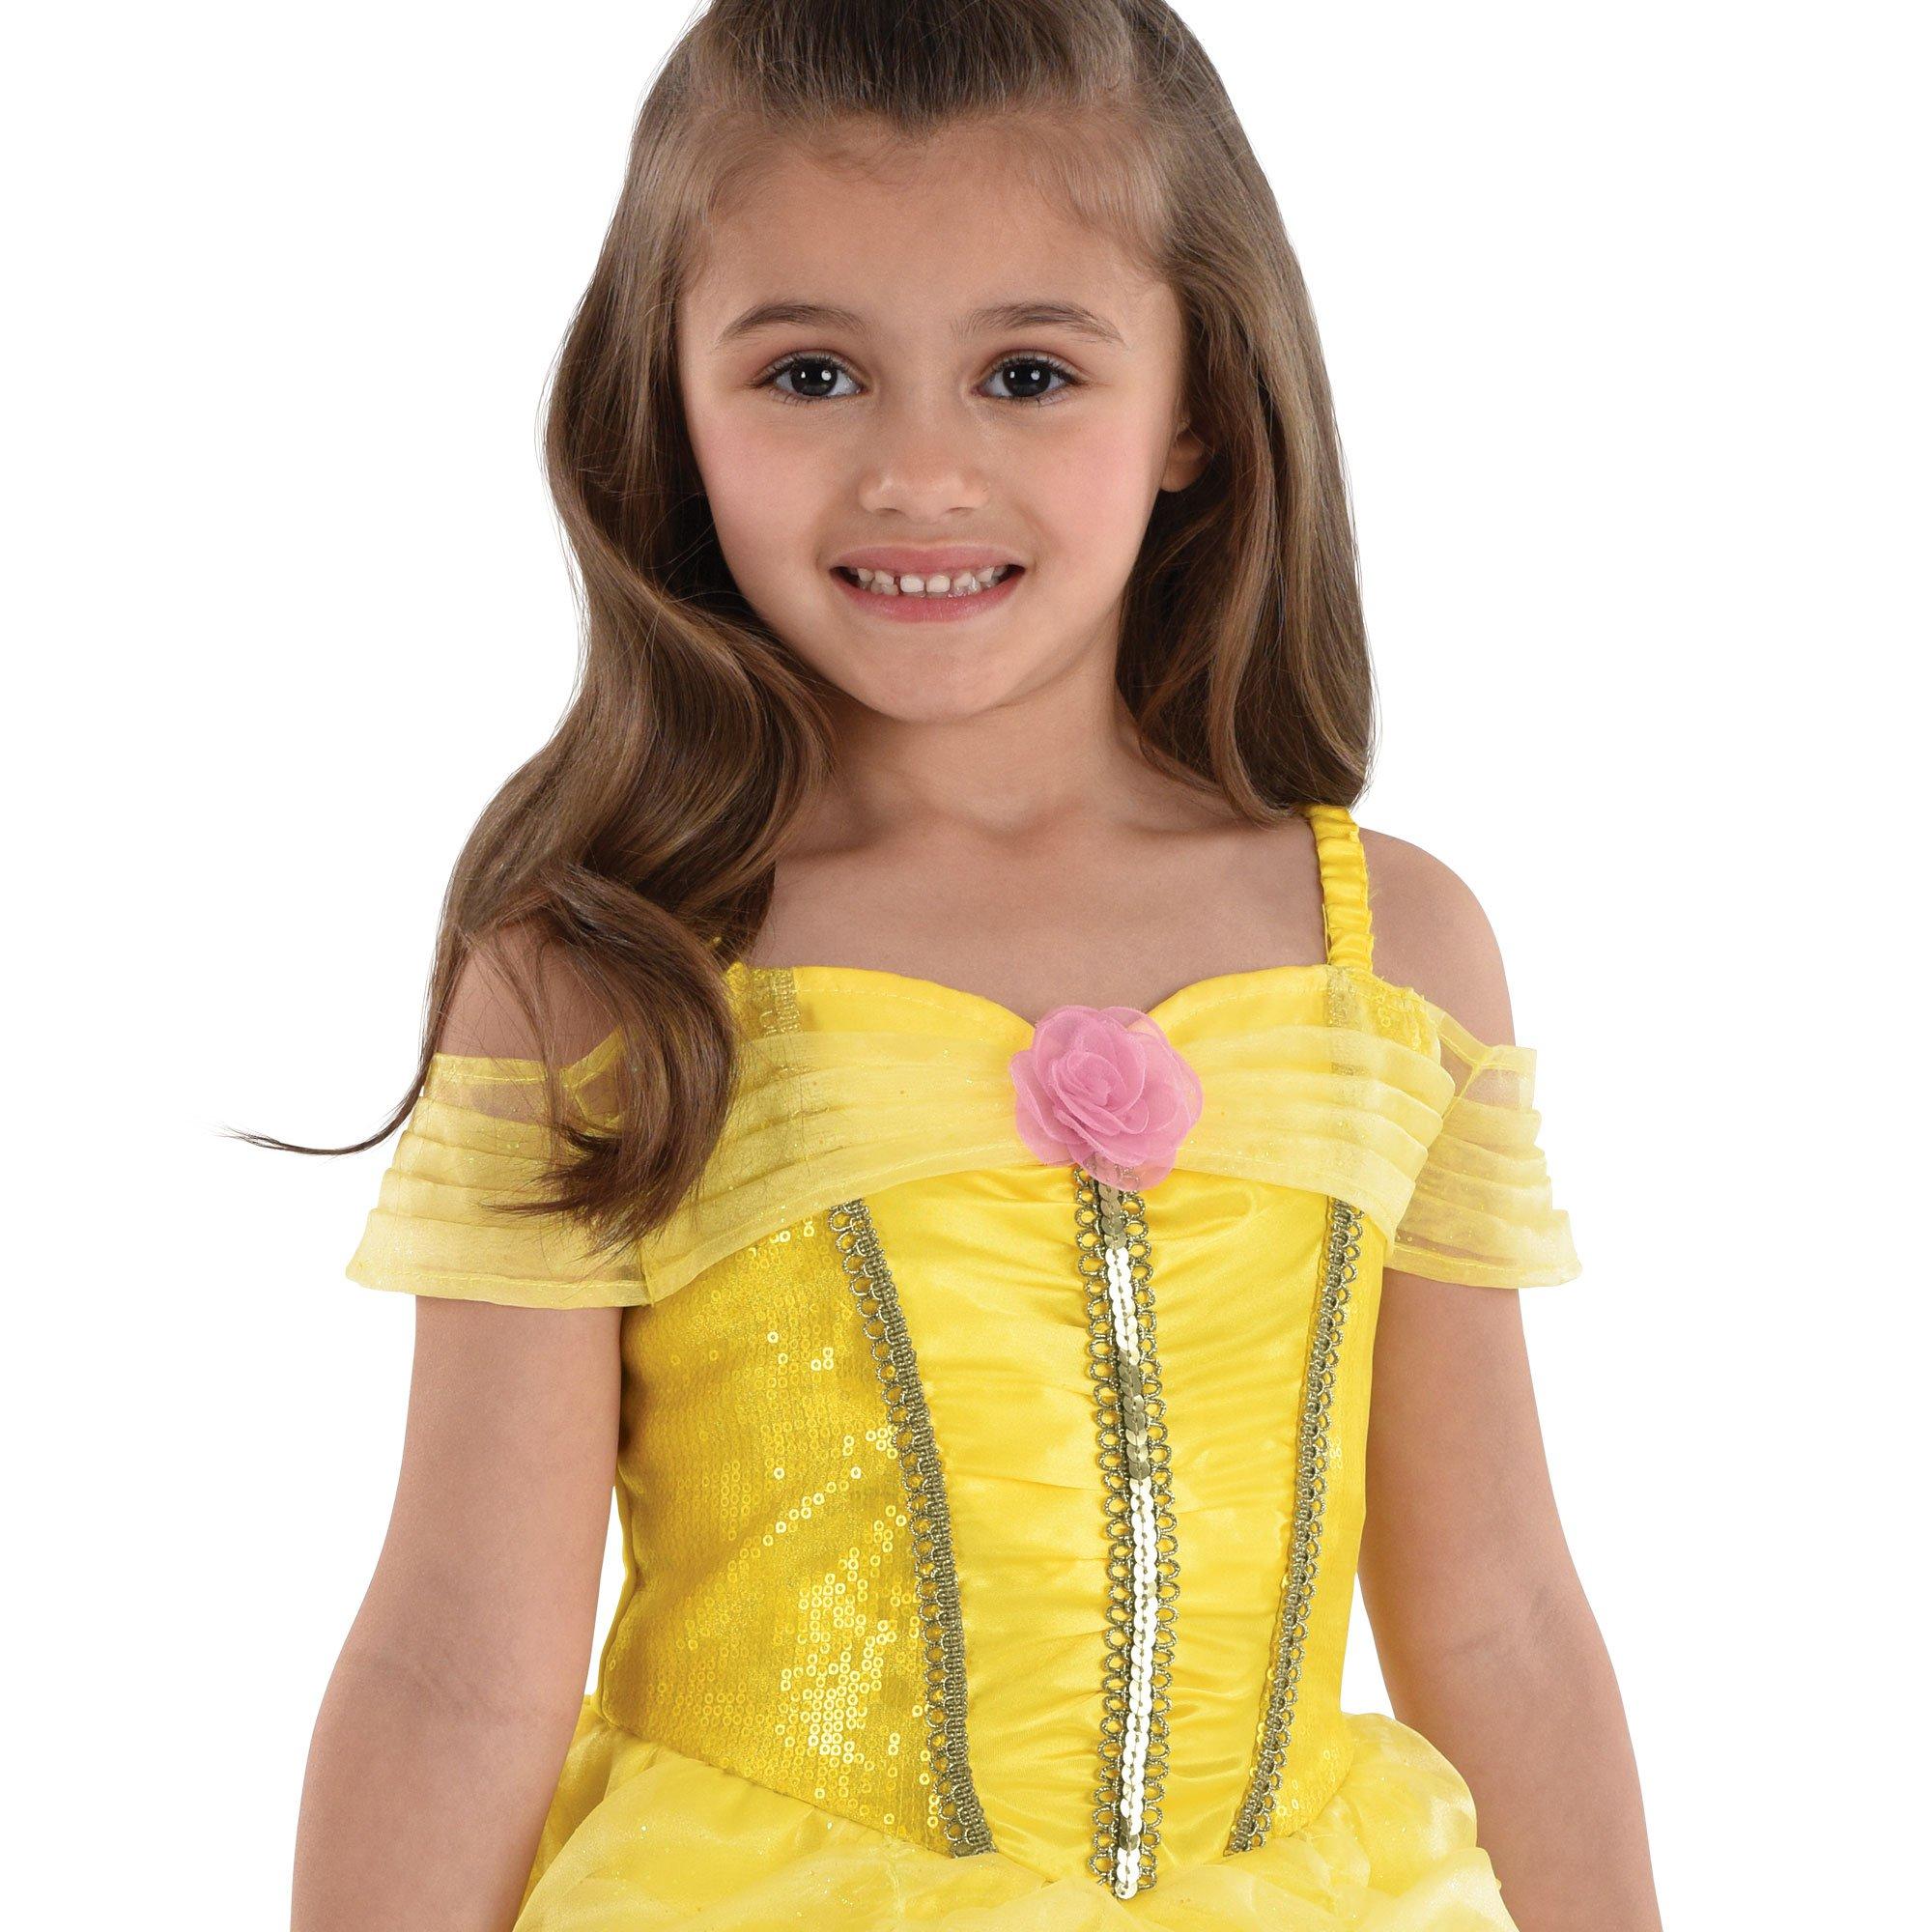 Belle Dress / Disney Princess Dress Beauty and the Beast Belle Costume /  Yellow Dress / for Toddler, Child, Girl / Princess Costume -  Canada